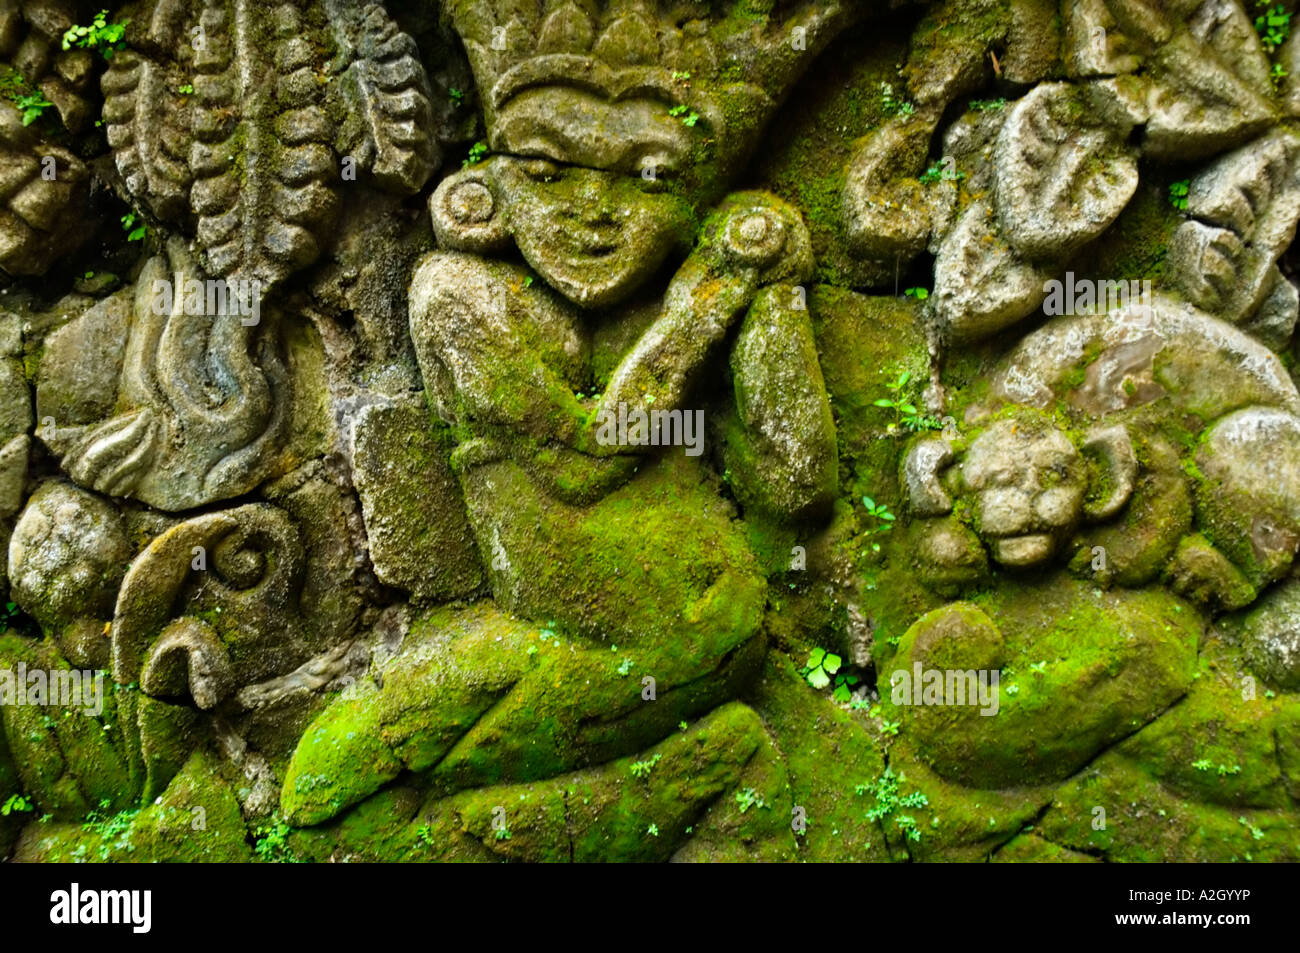 Indonesia Bali Ubud Agung Rai Museum of Art ARMA stone images covered by green moss and small plants Stock Photo